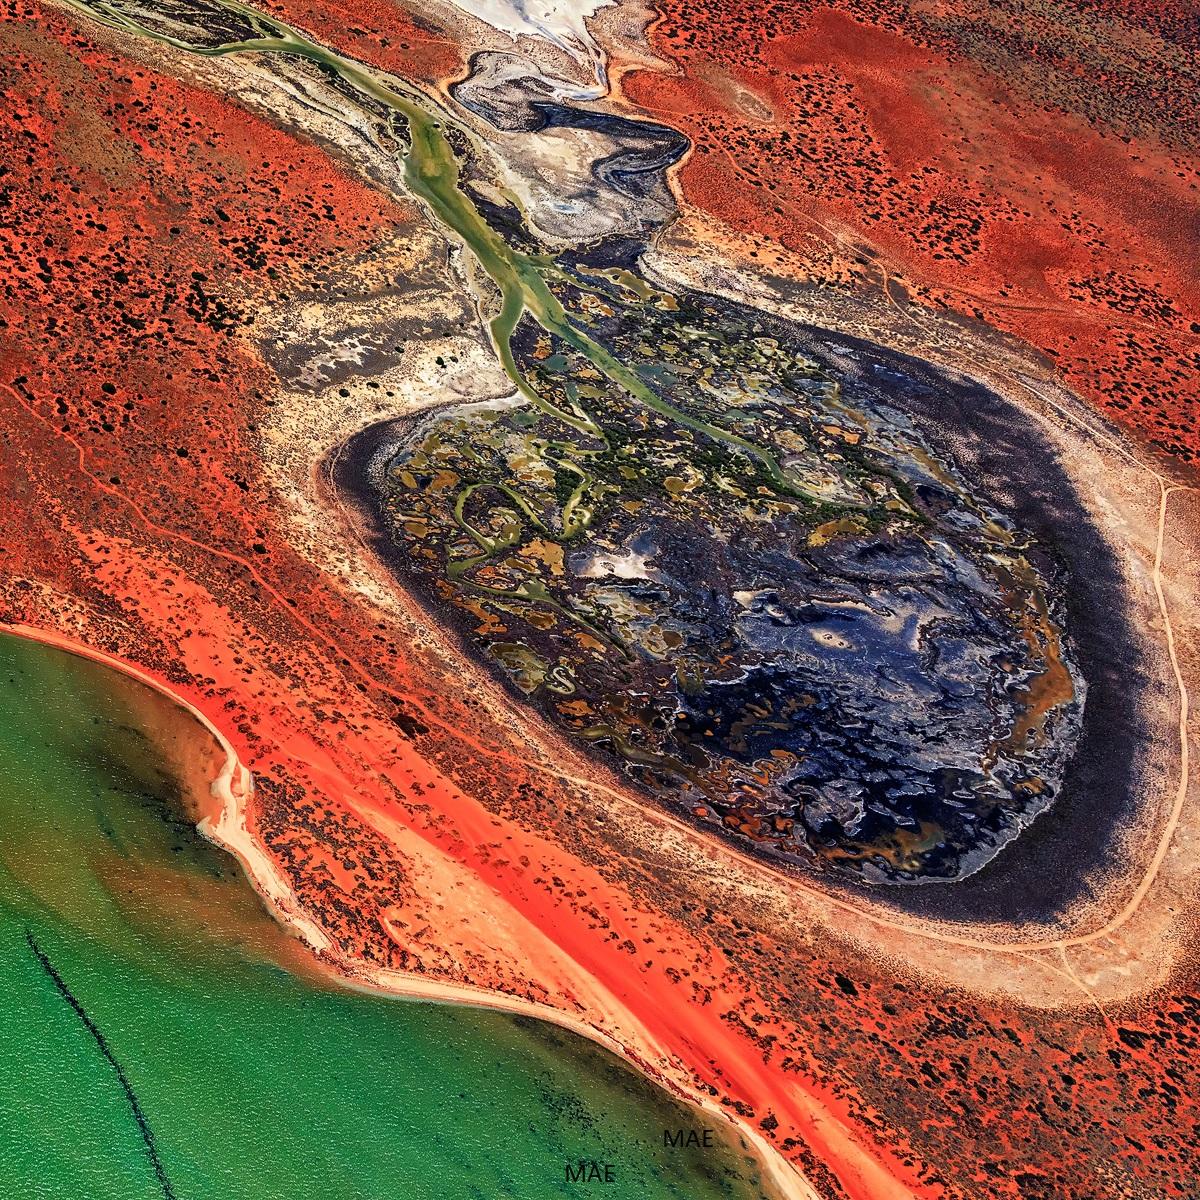 This is a new series of photography of land art depicting Earth and its land forms taken from the air. This series of aerial photography captures Earth's beauty in its natural, diverse and vibrant colors at world heritage preservation sites around